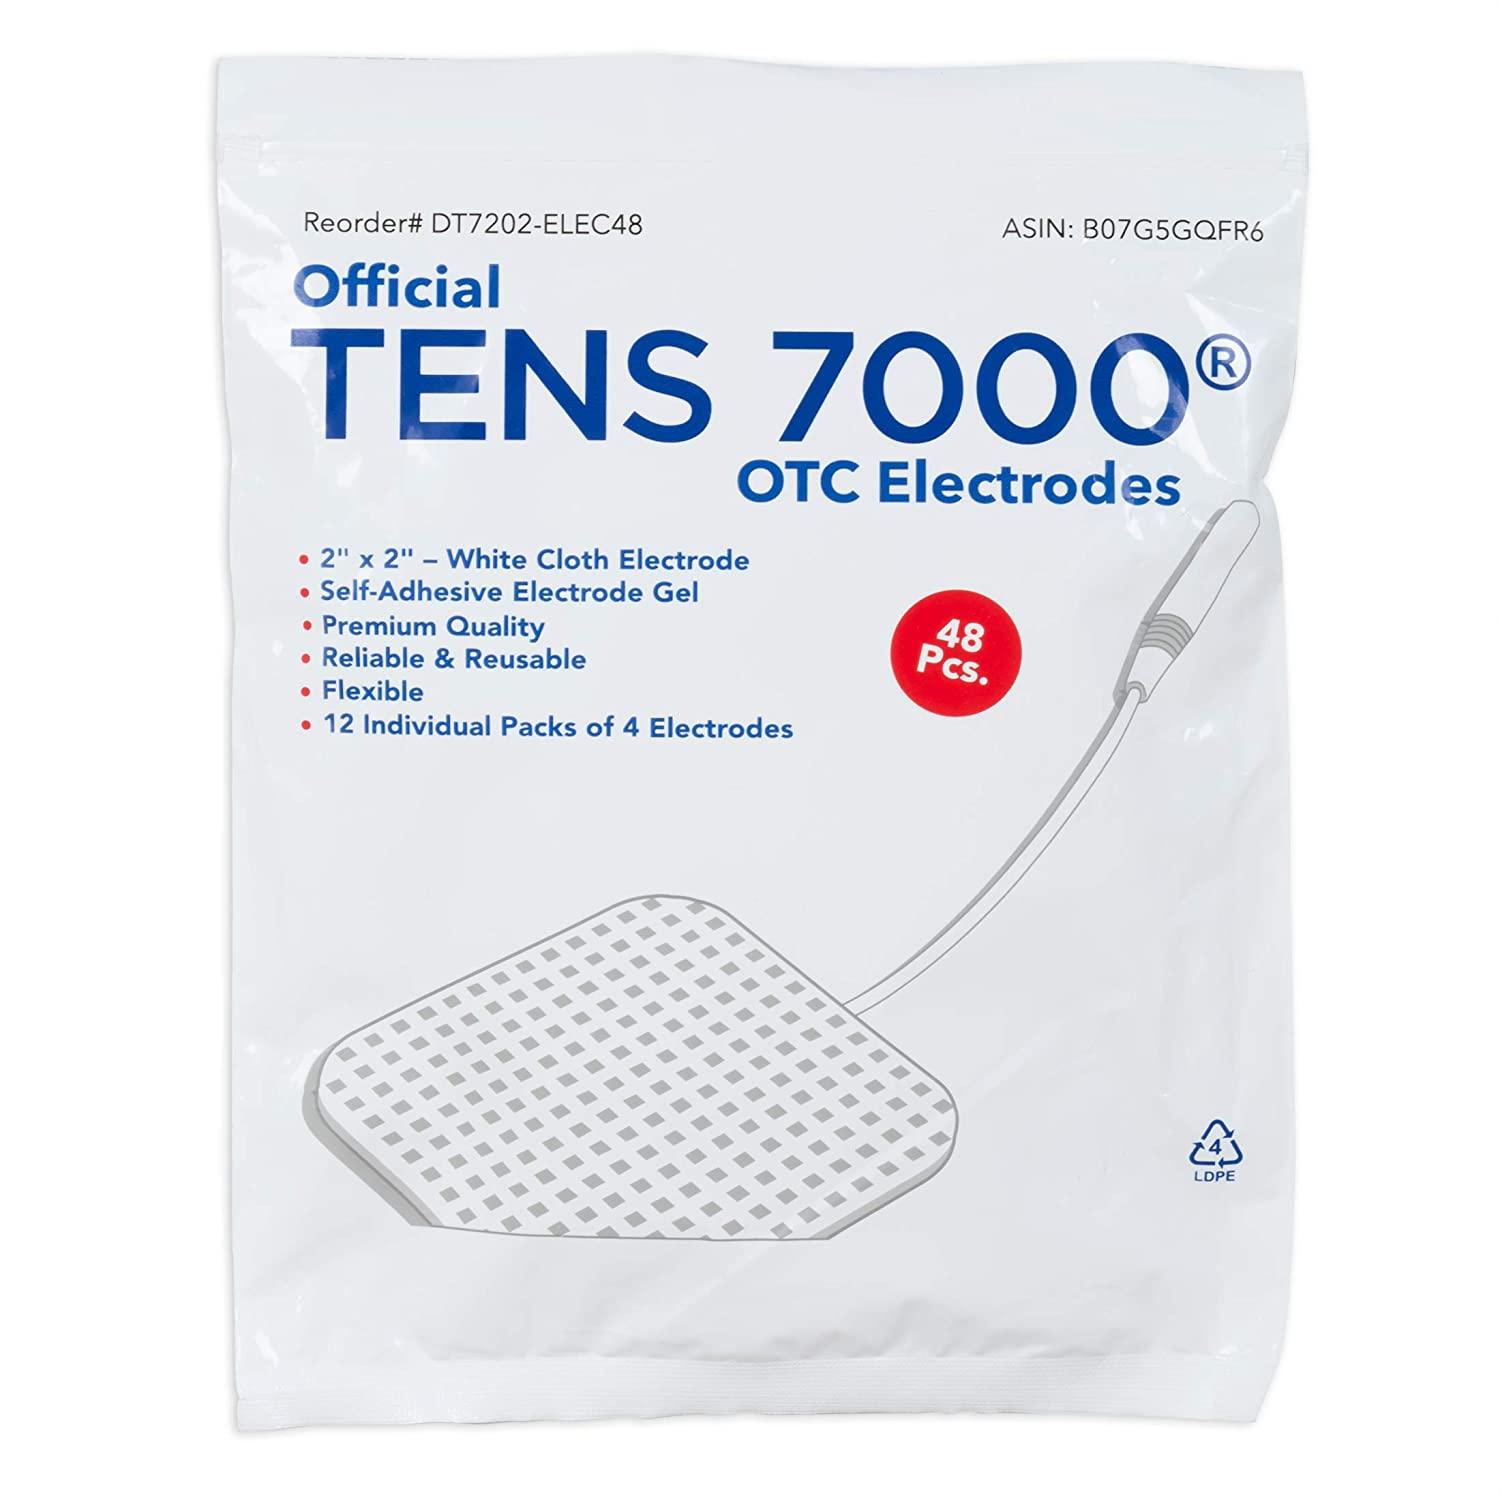 TENS 7000 Official TENS Unit Replacement Pads - 48 Pack